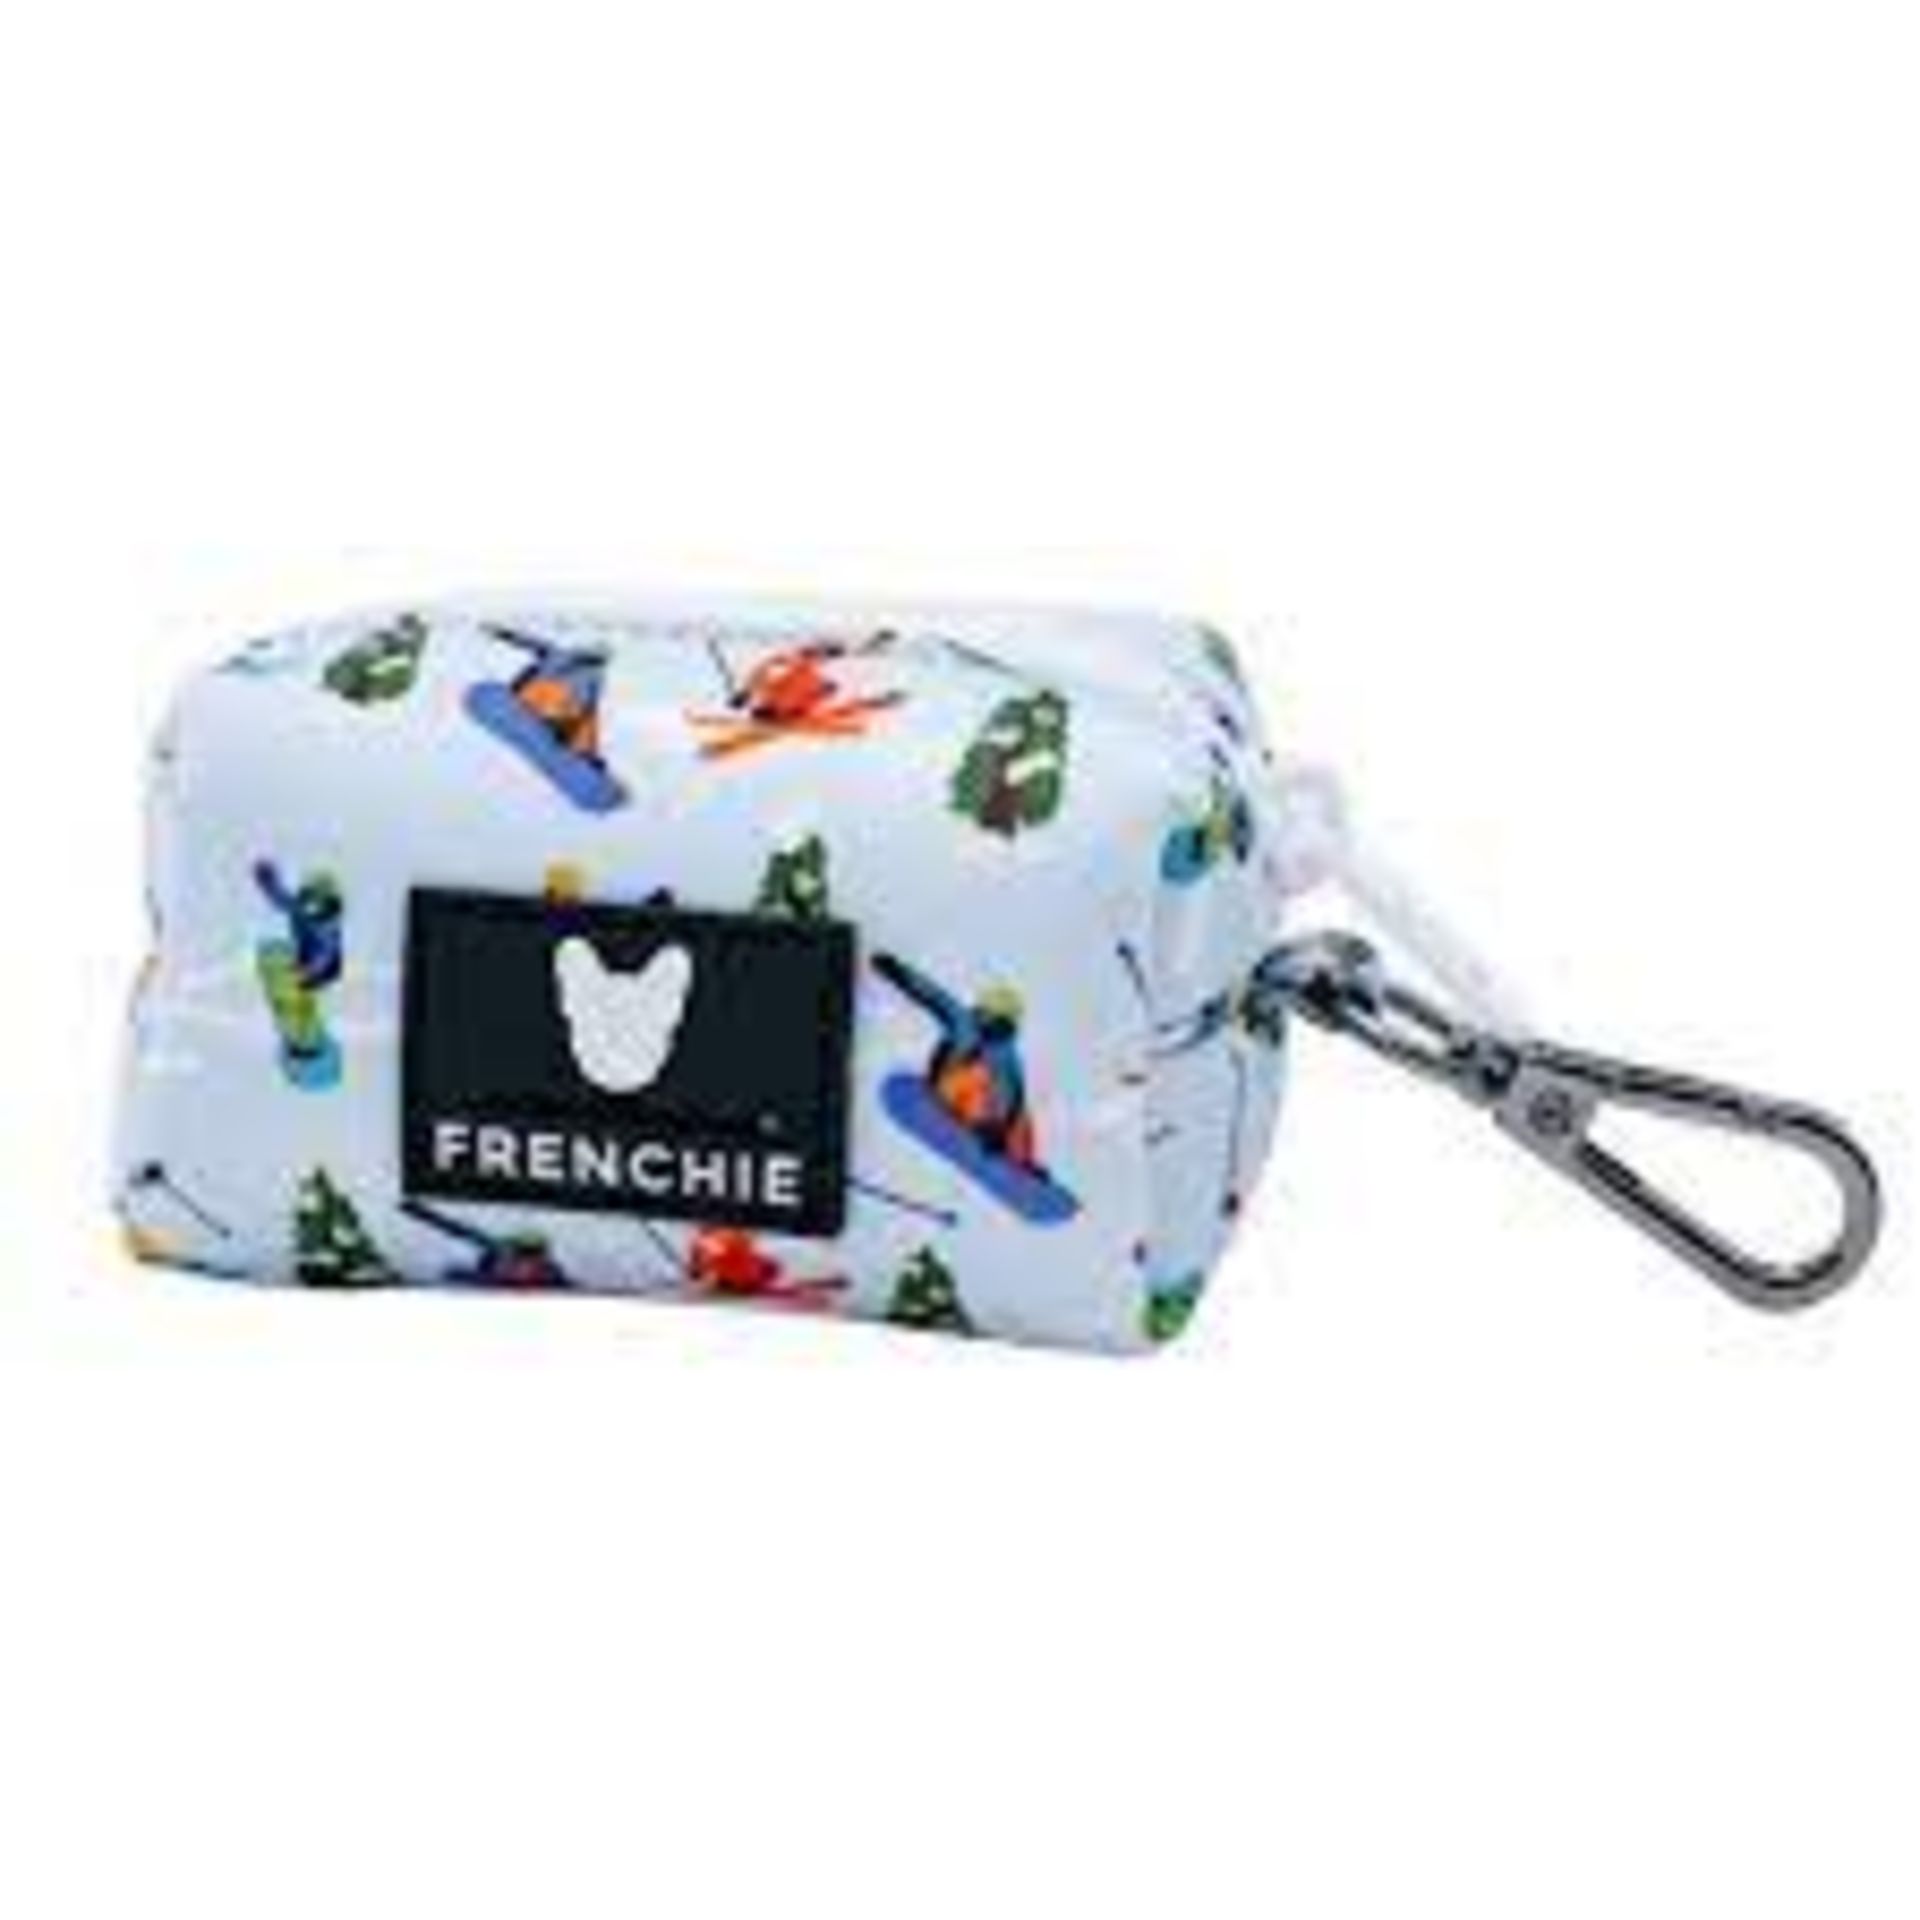 Trade Lot 100 X New .Packaged Frenchie The Bulldog Luxury Branded Dog Products. May include items - Image 12 of 50